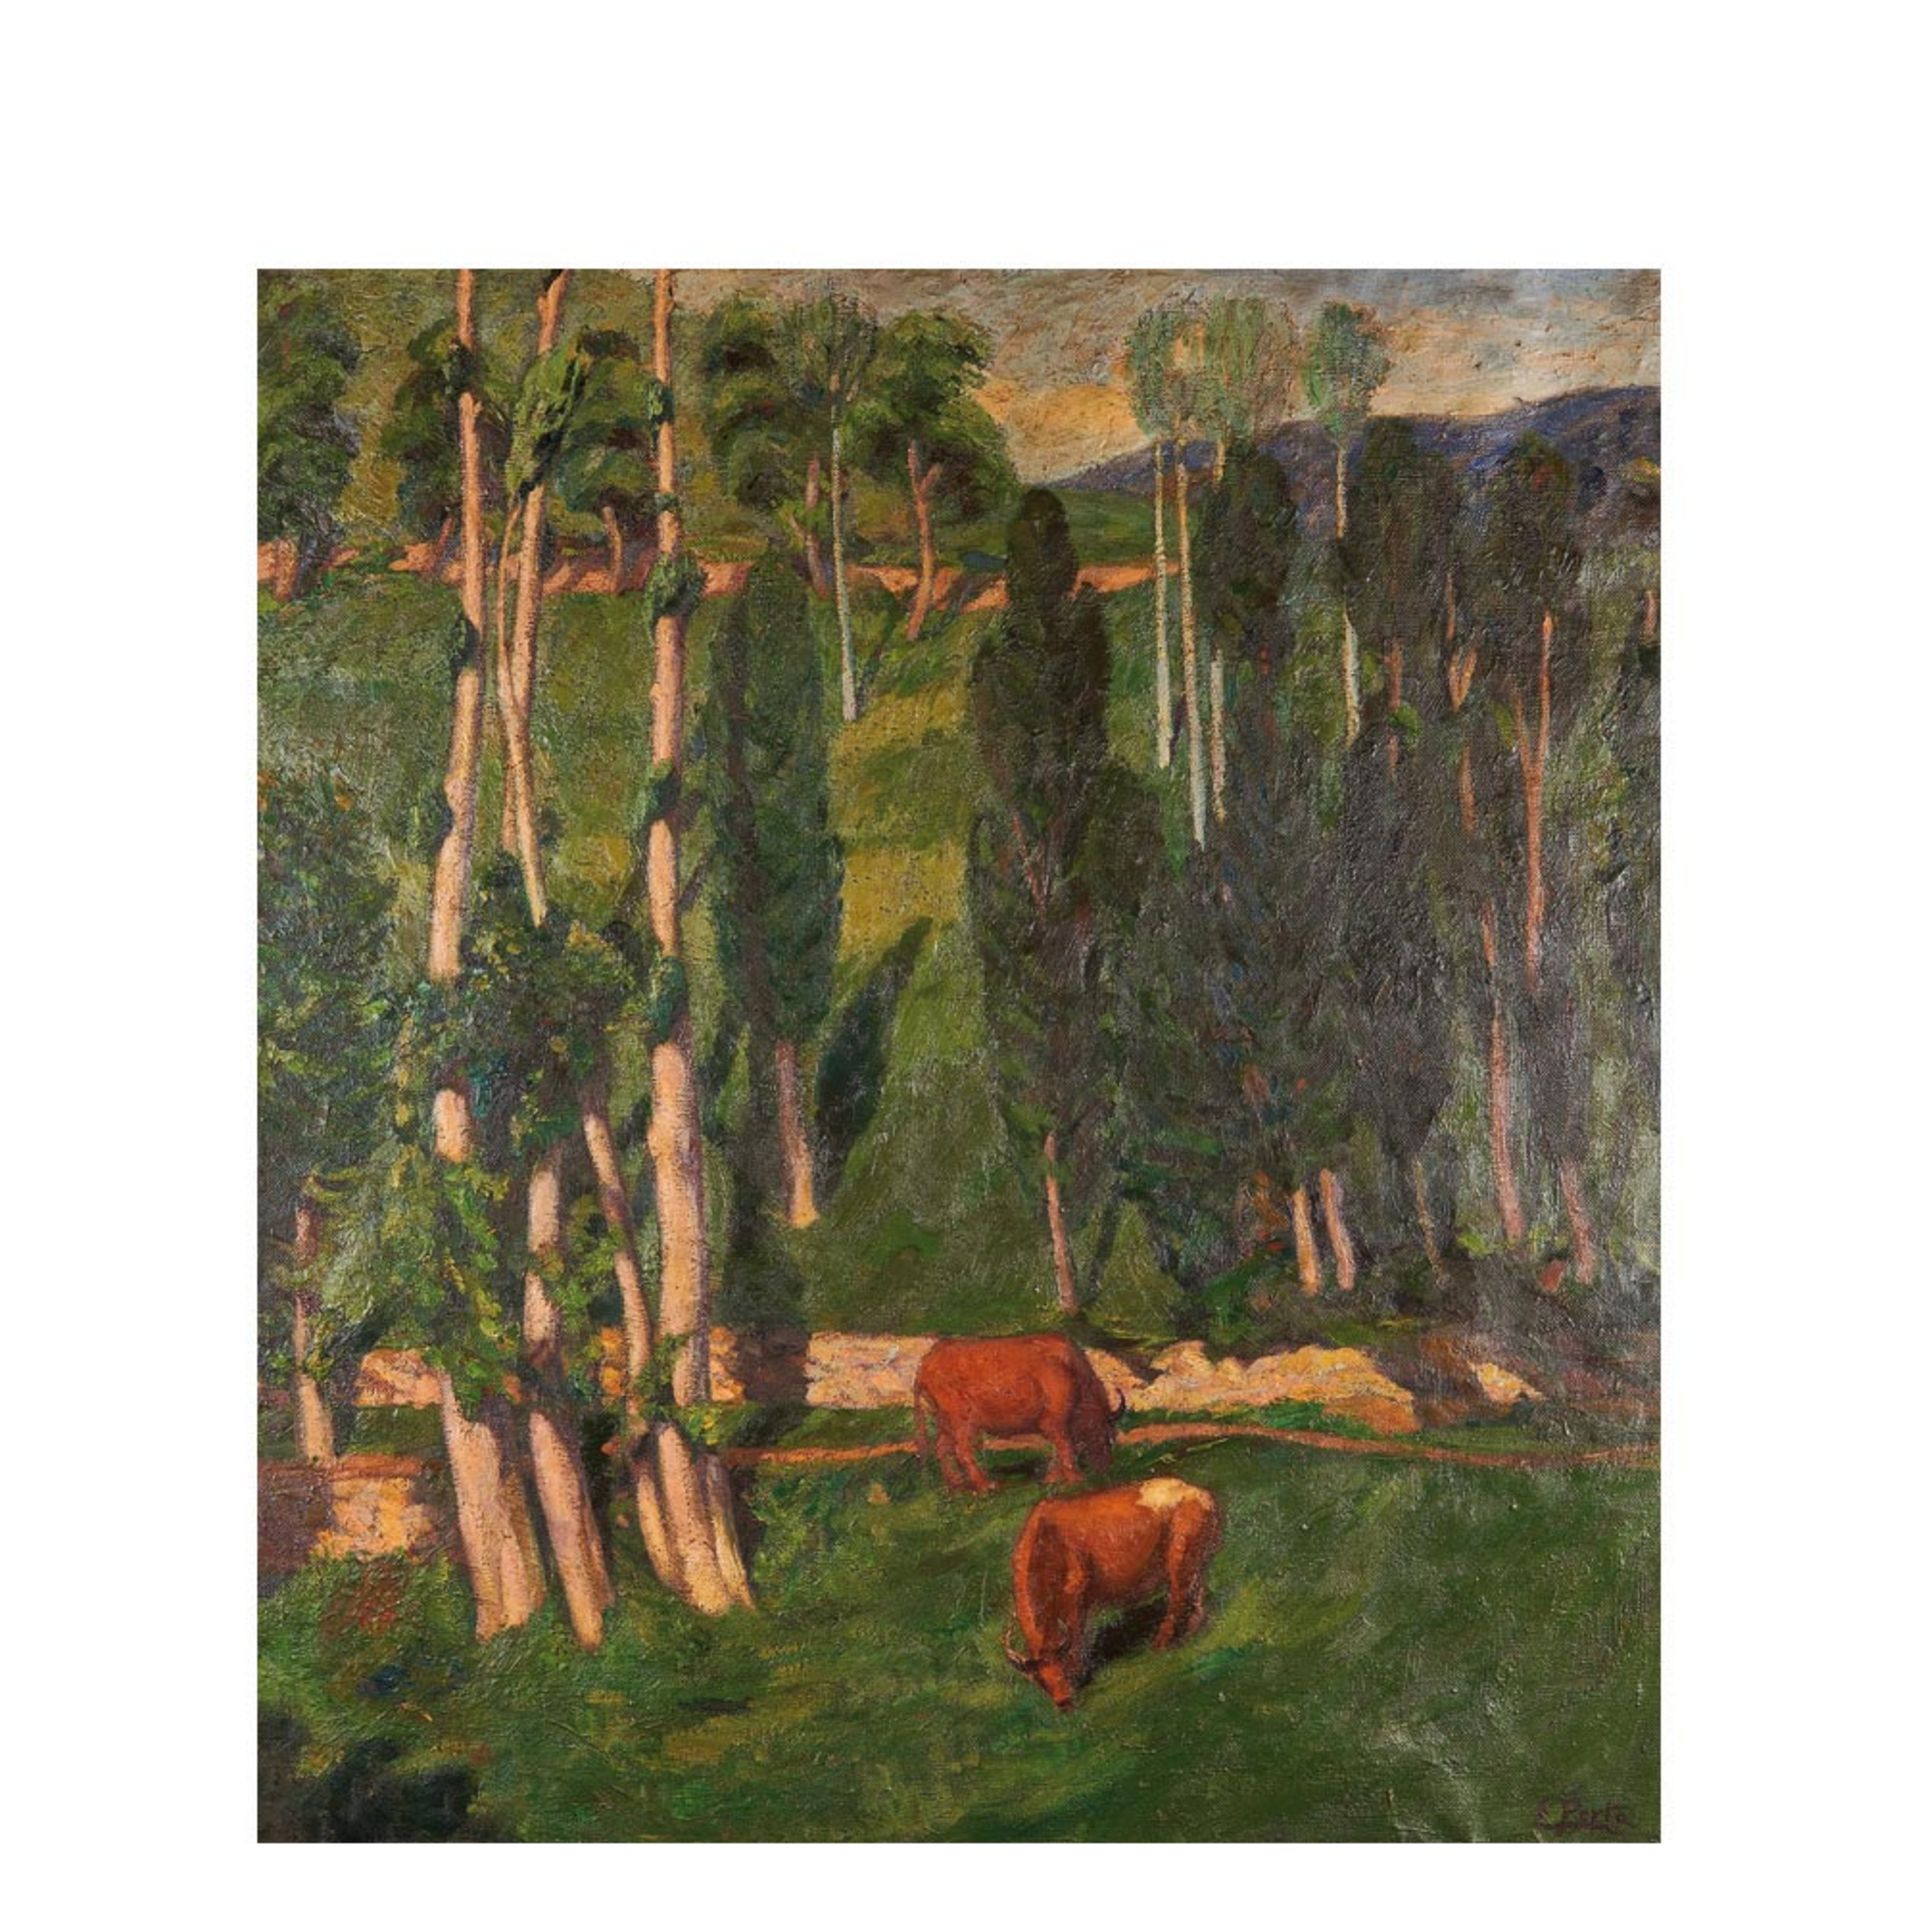 Landscape with cows. Oil on canvas